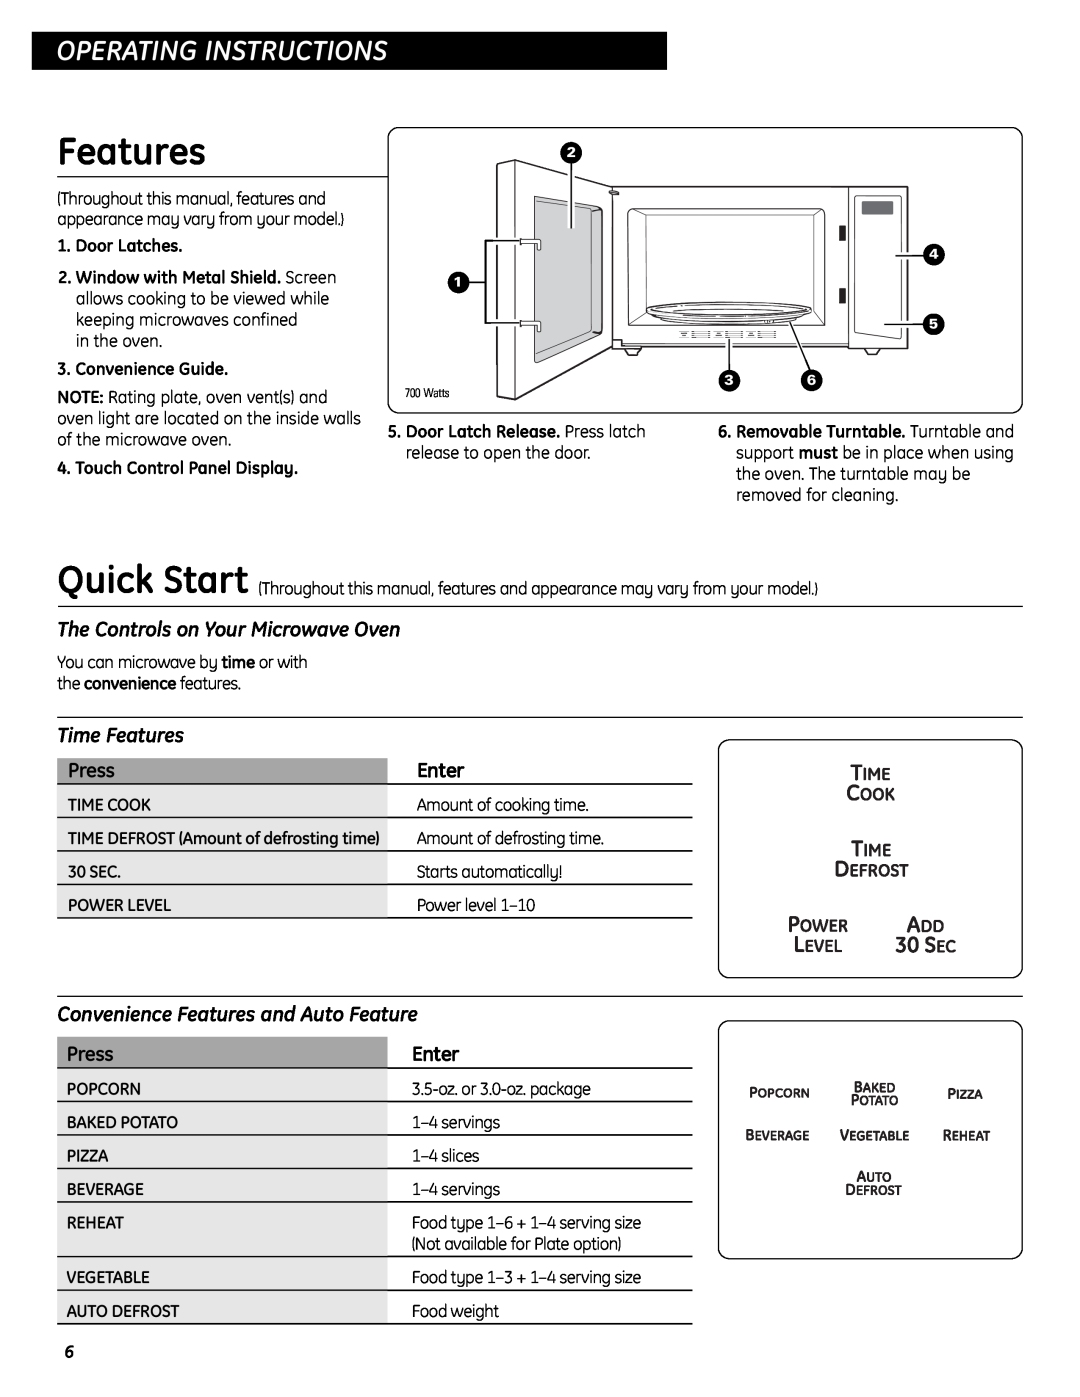 GE JES0737 Operating Instructions, The Controls on Your Microwave Oven, Time Features, Enter, Press, Door Latches 